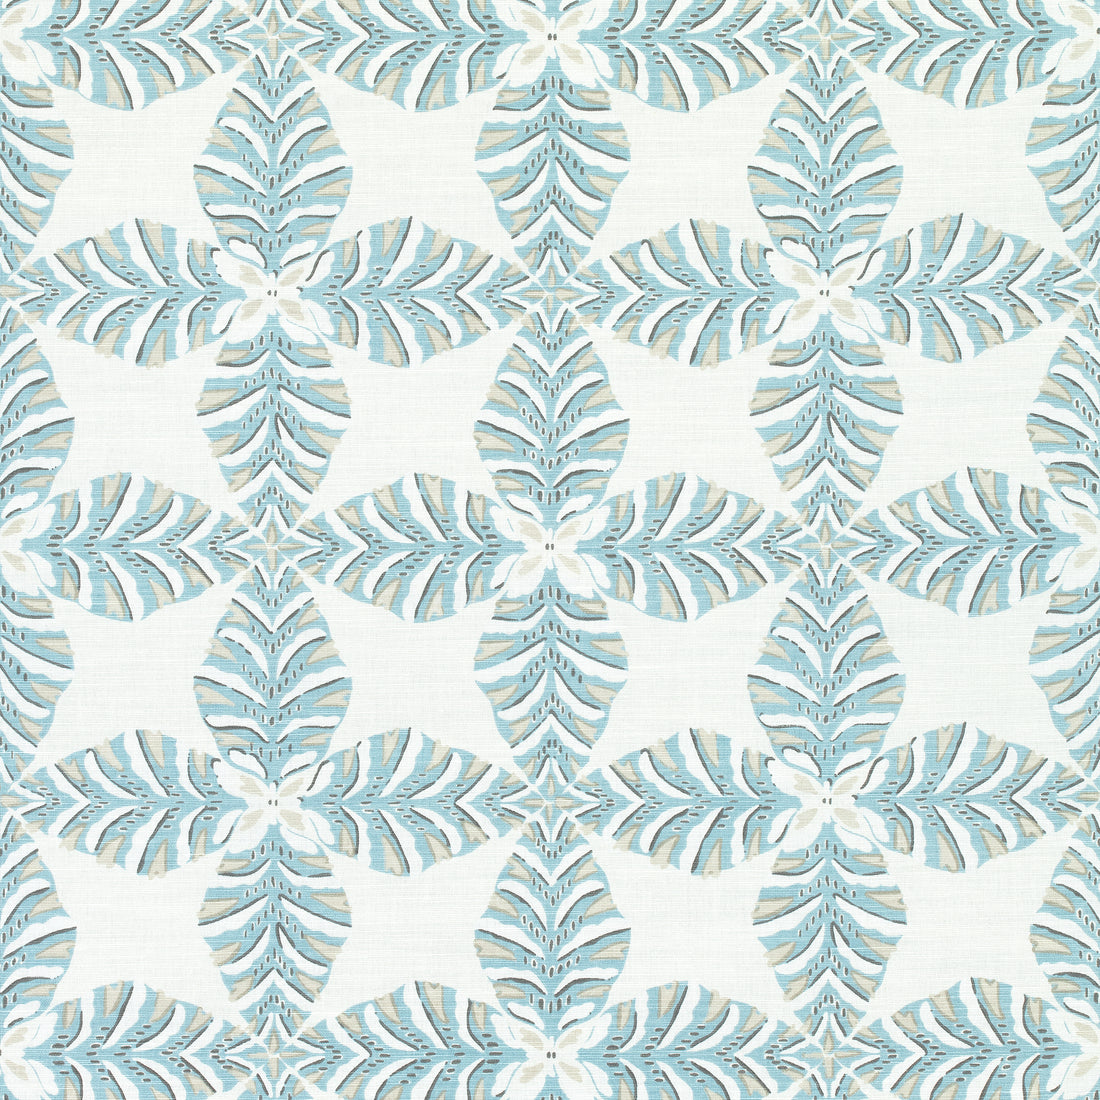 Starleaf fabric in aqua color - pattern number F92972 - by Thibaut in the Paramount collection